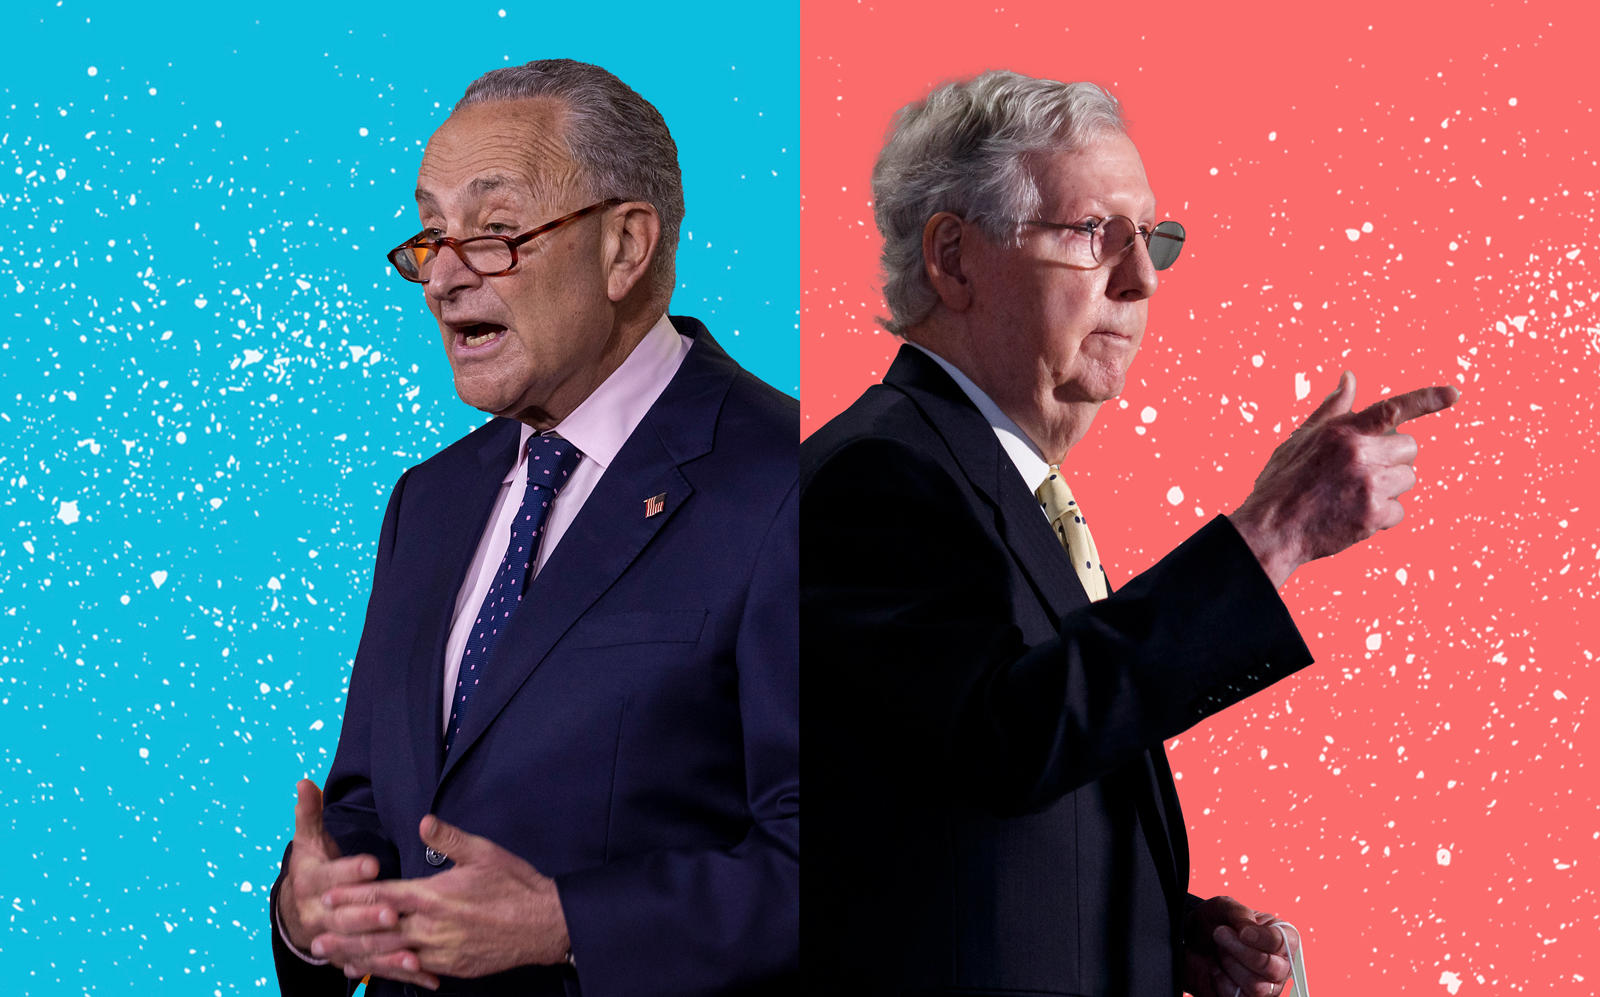 Senate Minority Leader Chuck Schumer and Senate Majority Leader Mitch McConnell (Schumer by Tasos Katopodis/Getty Images; McConnell by Ting Shen/Xinhua via Getty)